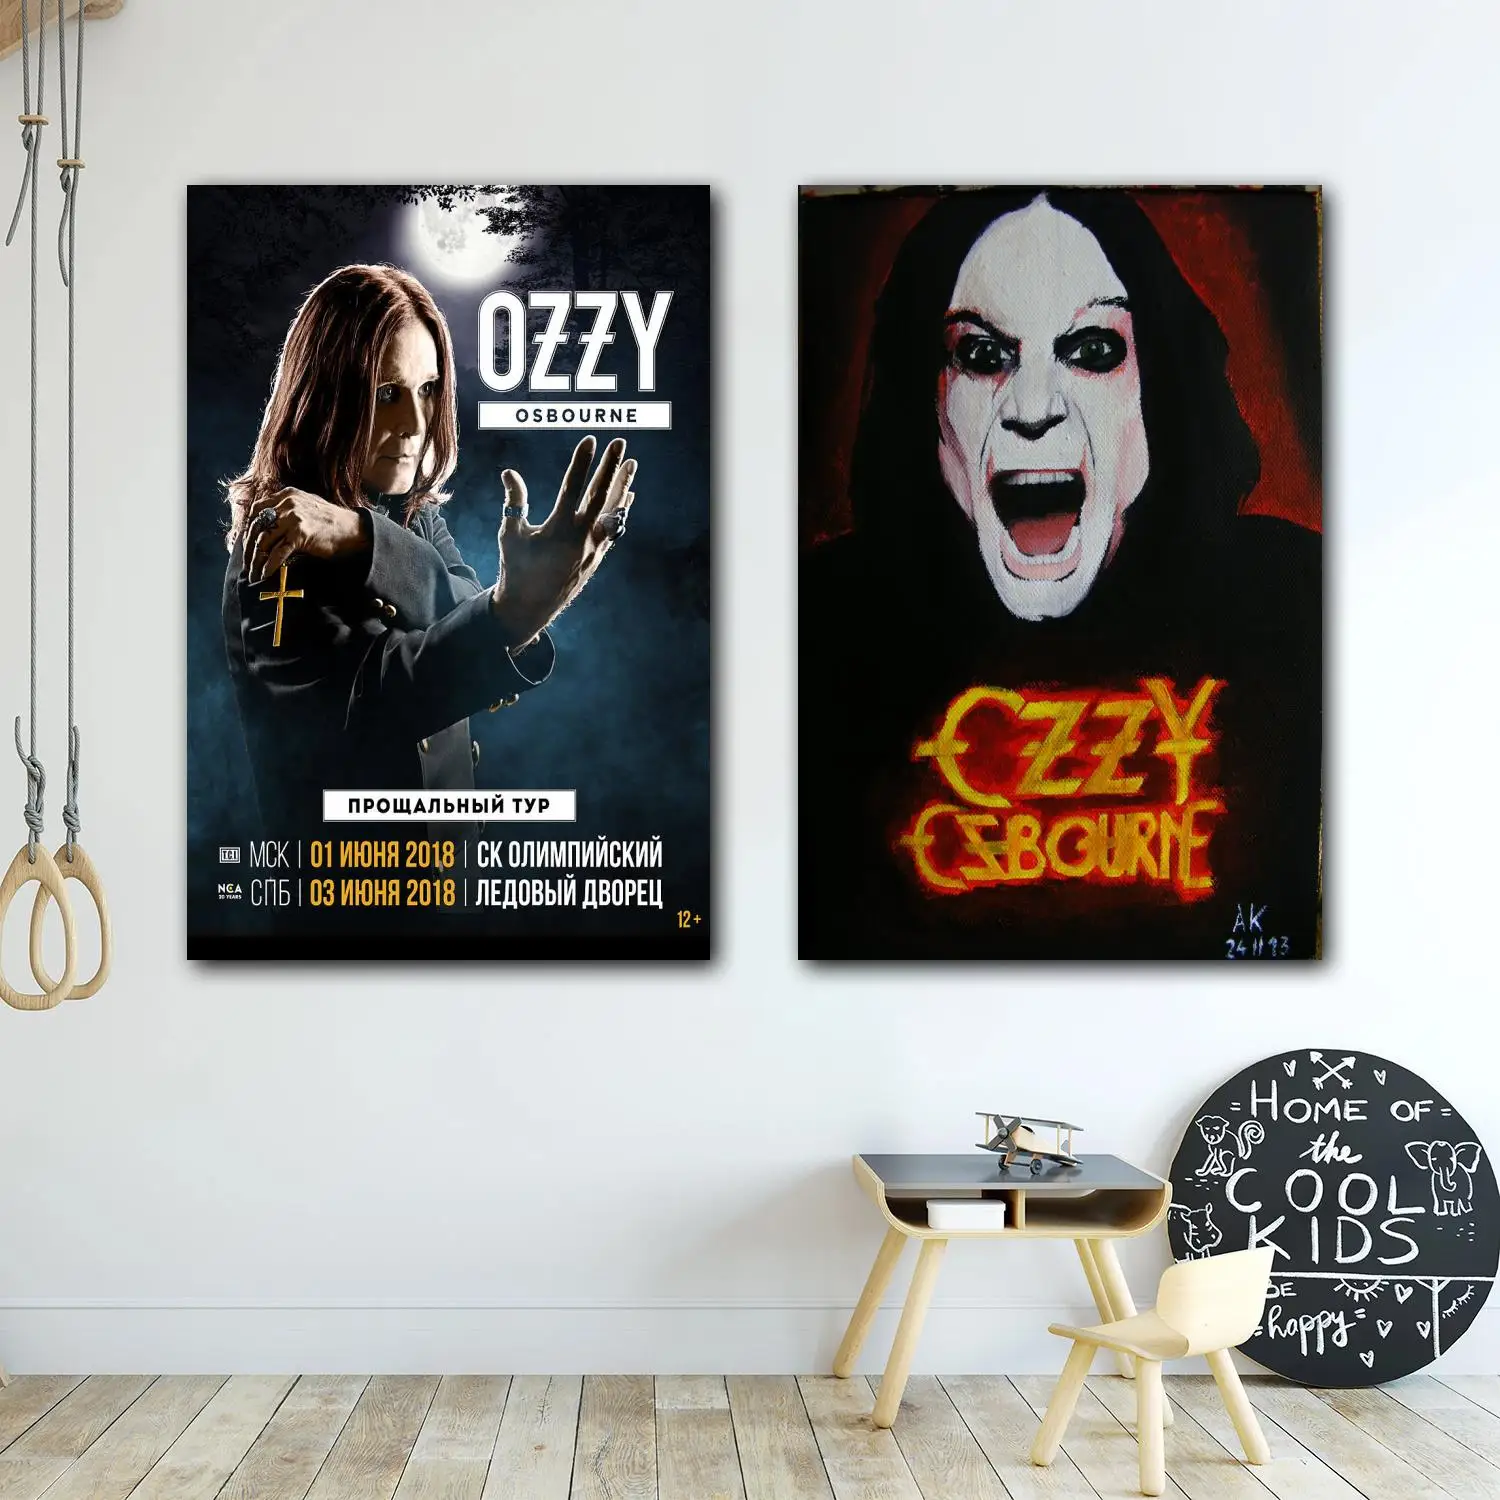 

ozzy osbourne singer Decorative Canvas 24x36 Posters Room Bar Cafe Decor Gift Print Art Wall Paintings